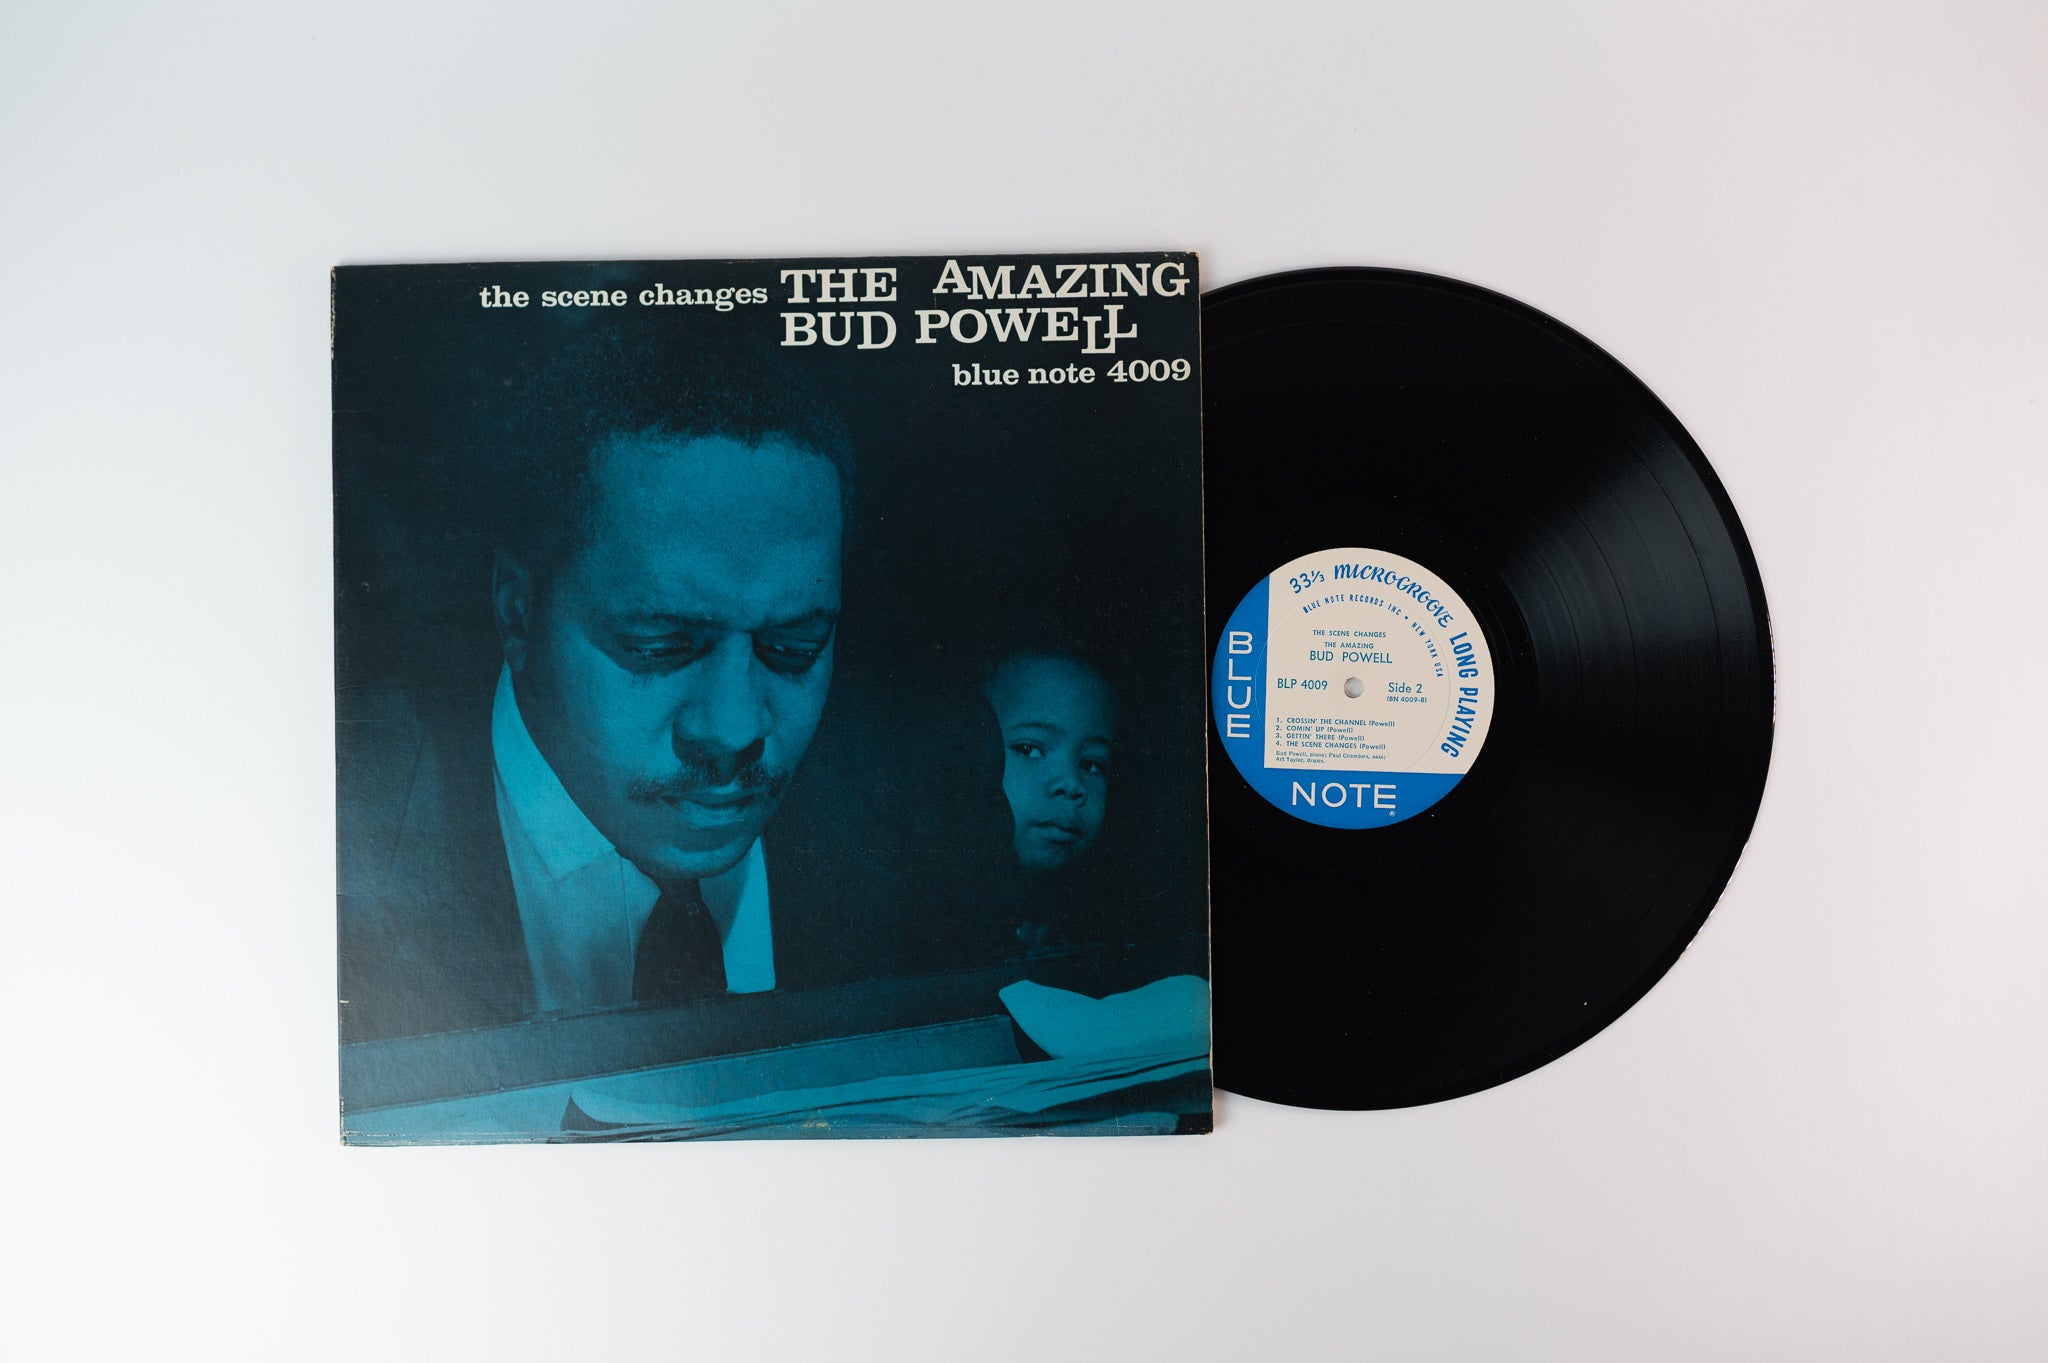 Bud Powell - The Scene Changes, Vol. 5 on Blue Note Mono NY